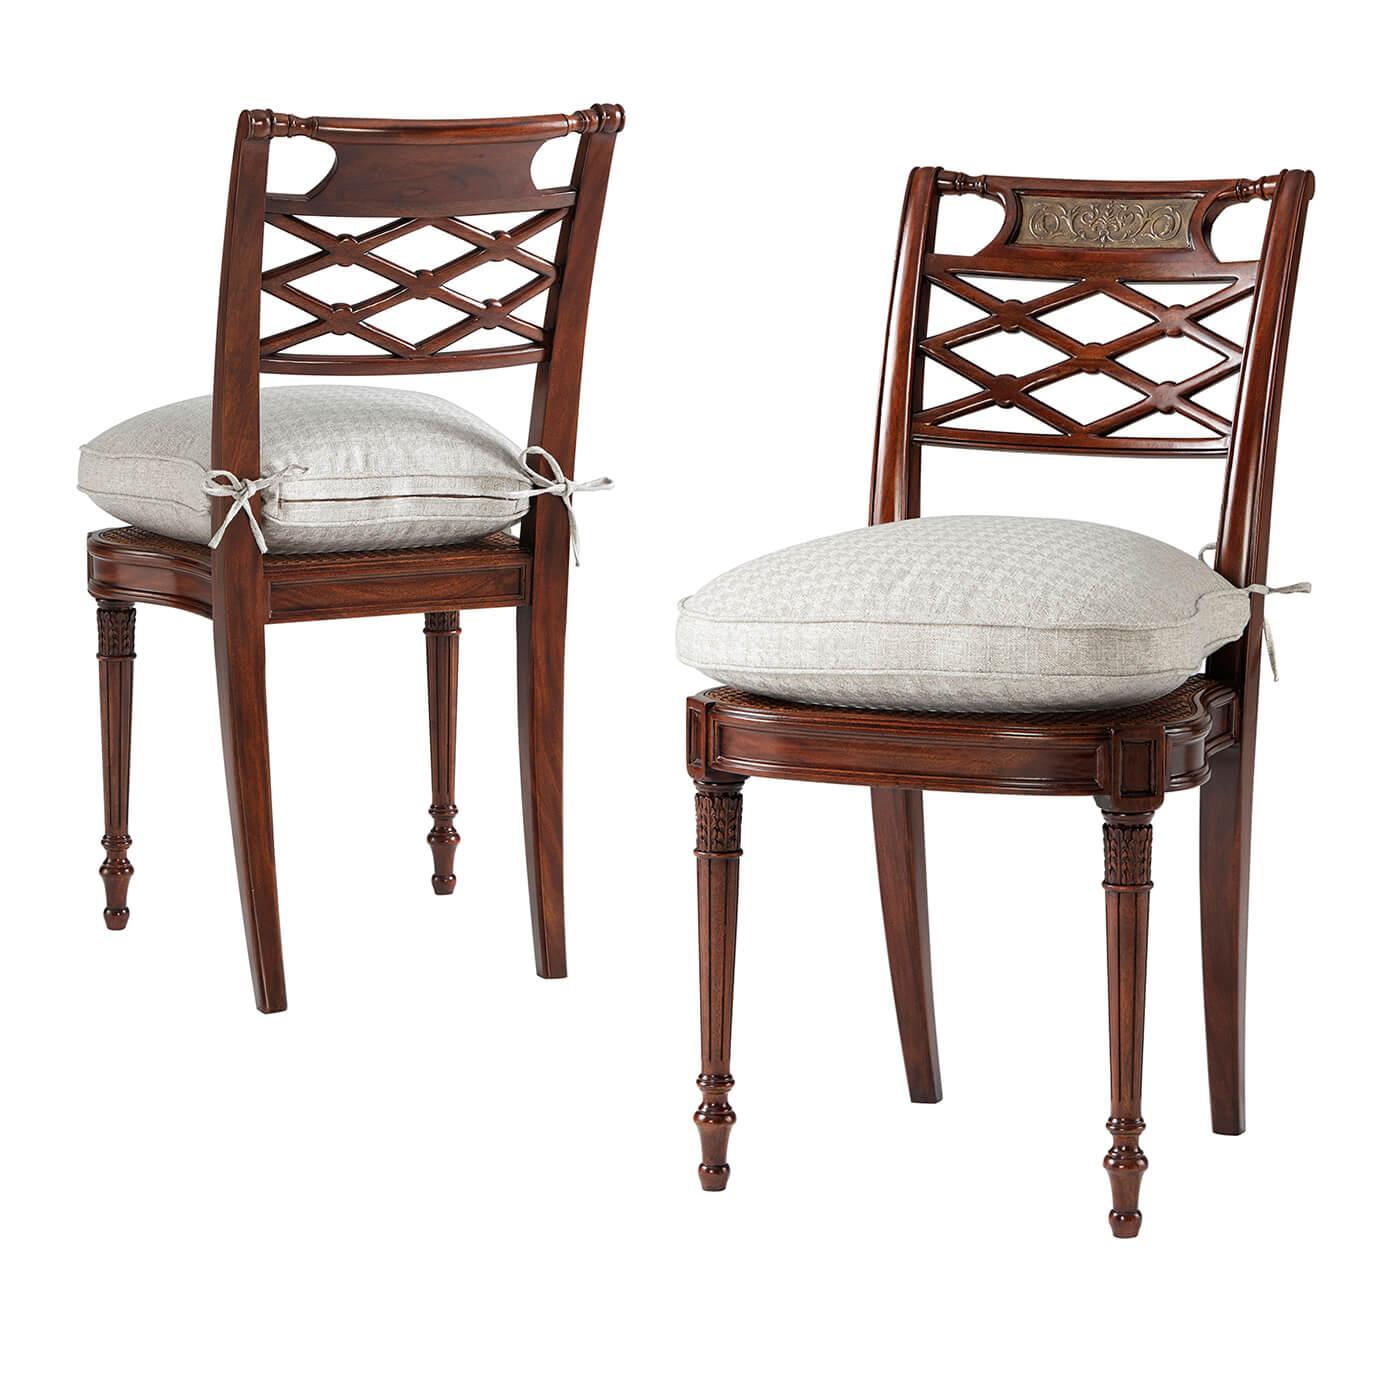 Regency Style Lattice Back Dining Chair For Sale